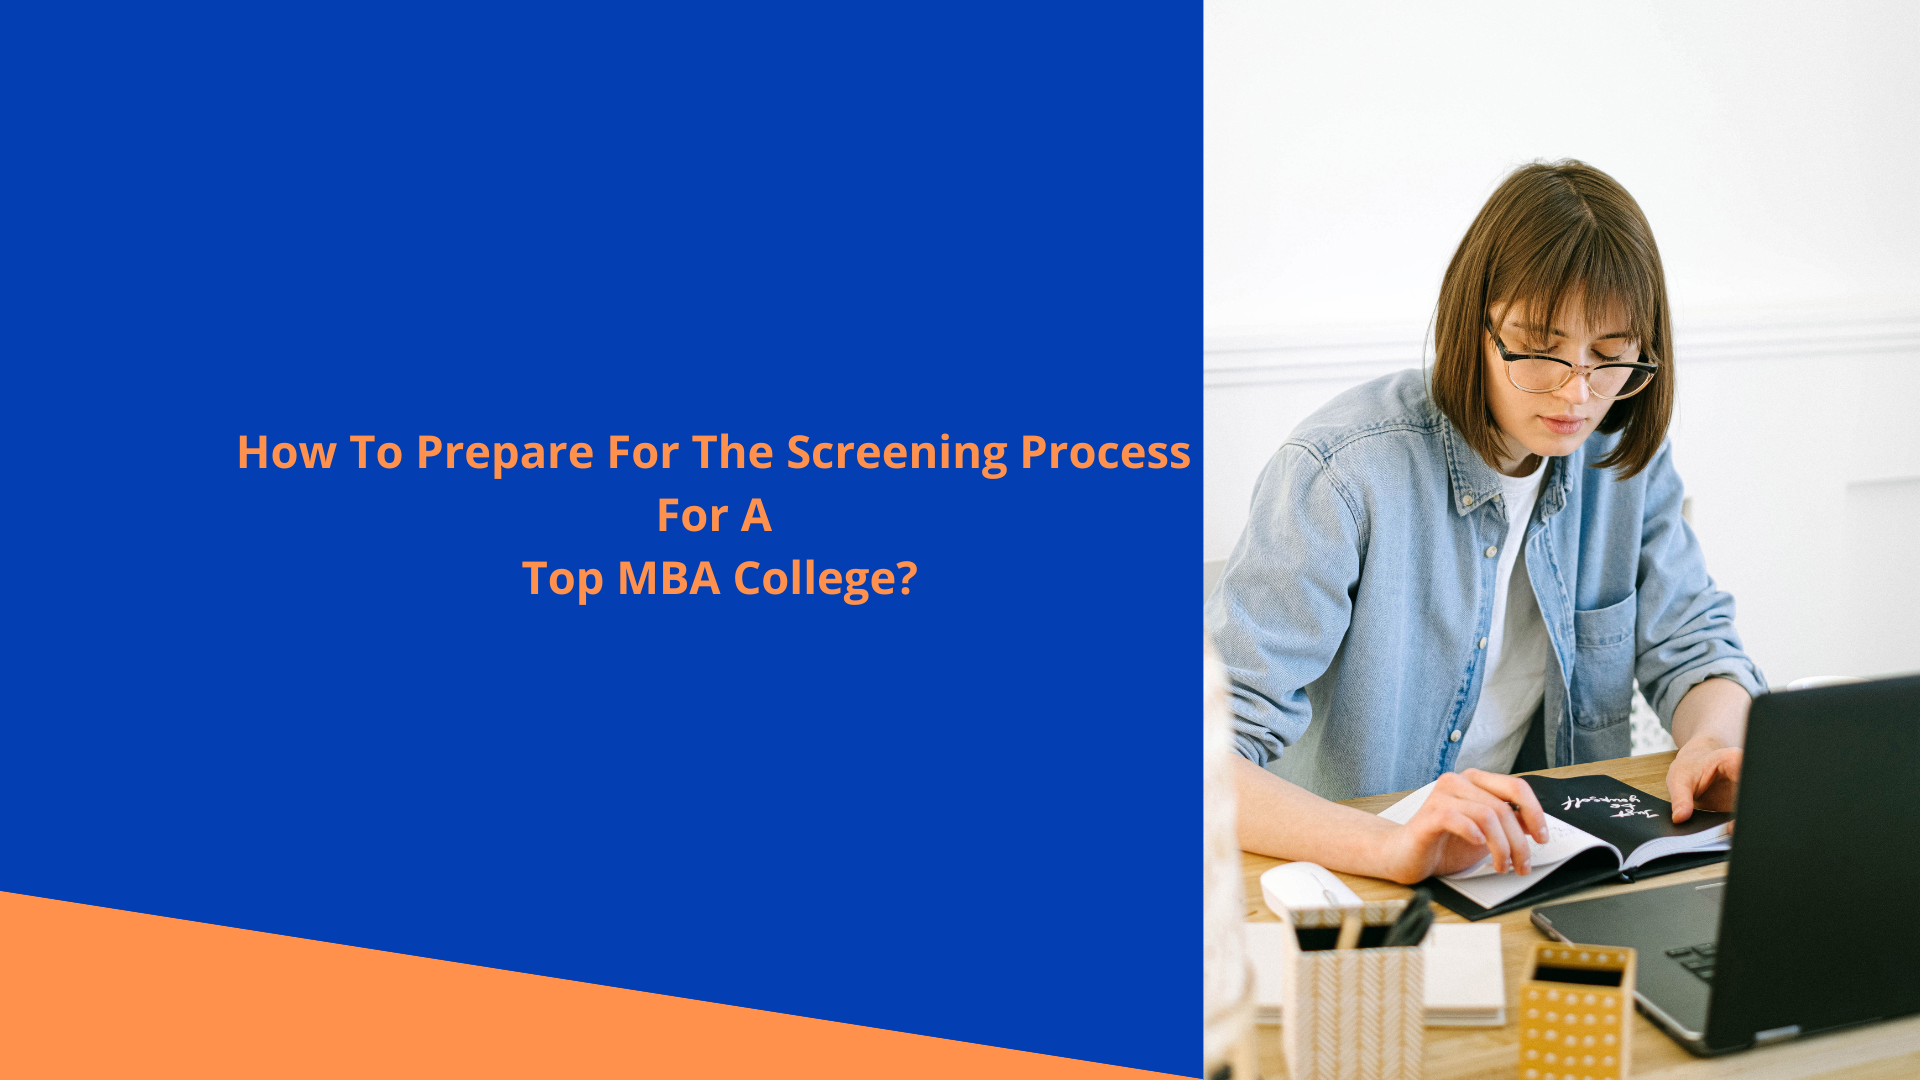 How To Prepare For The Screening Process For A Top MBA College?